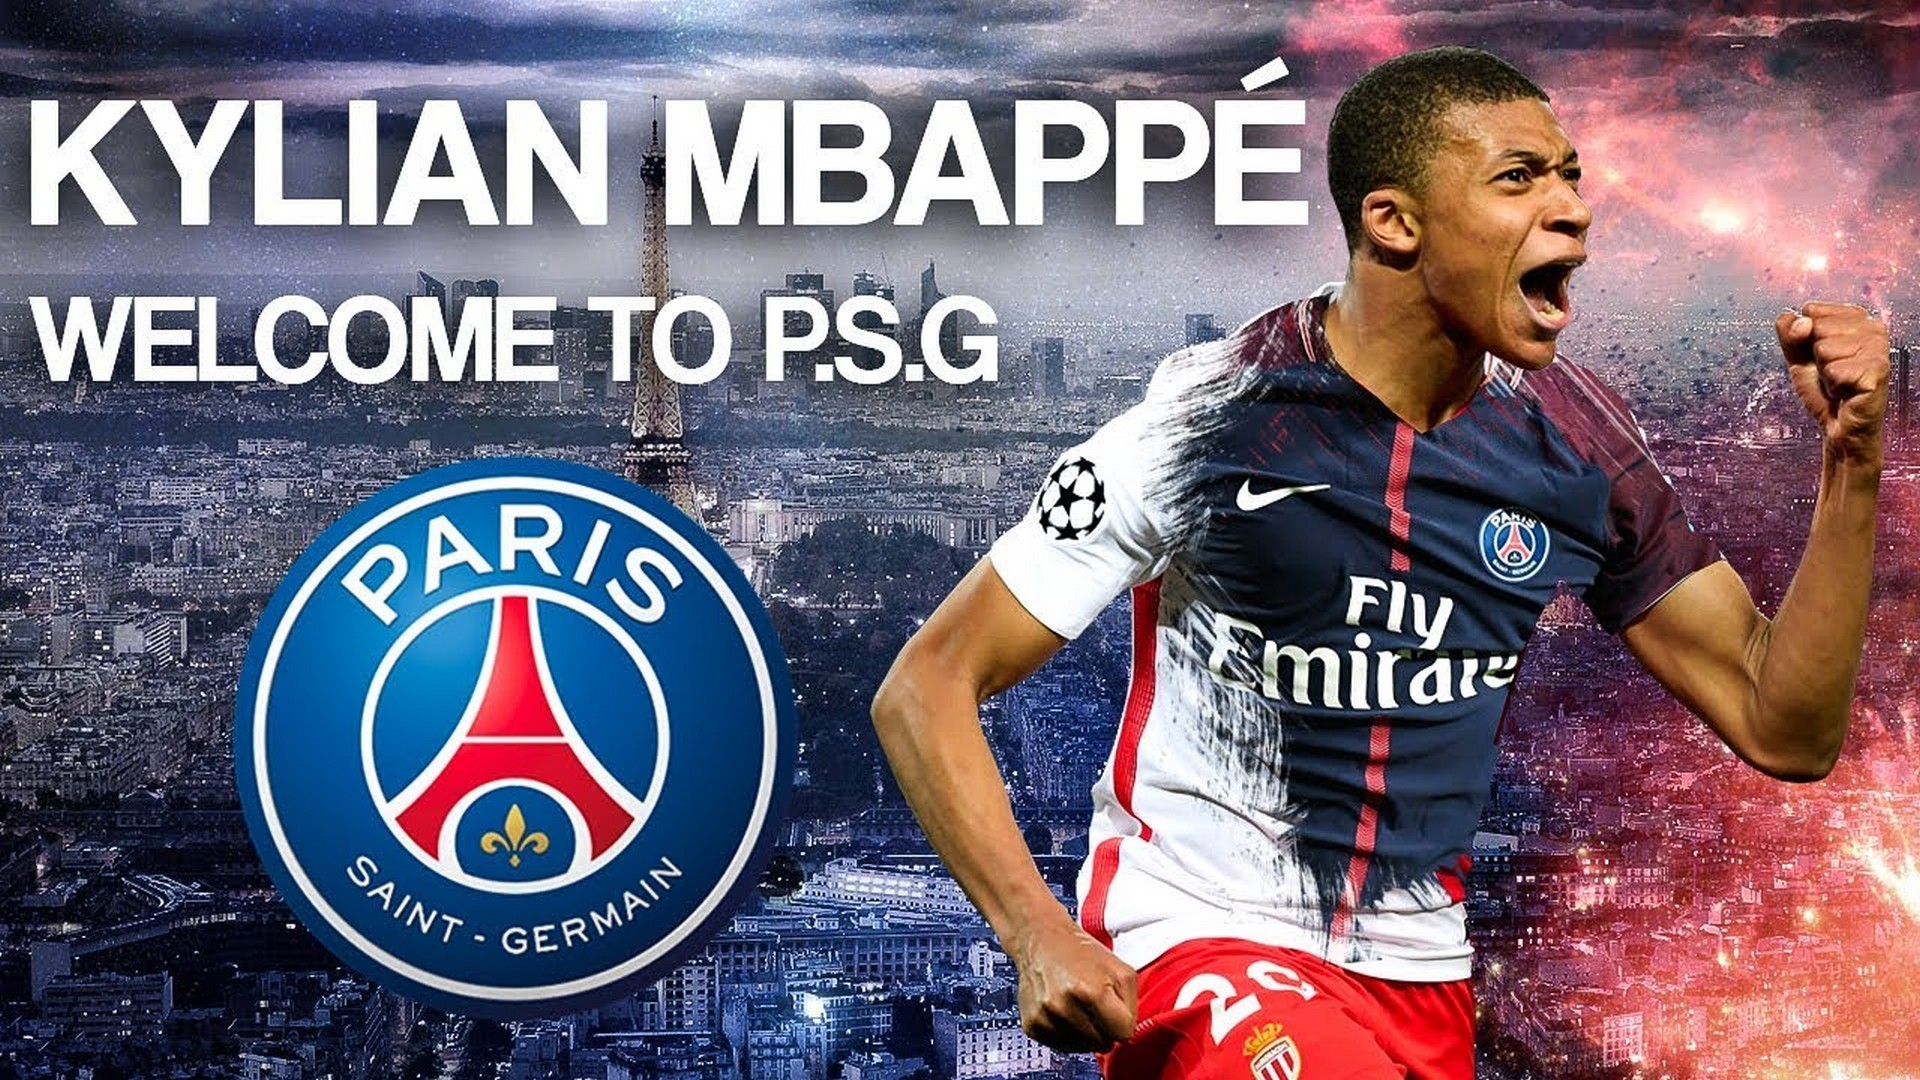 Mbappe Paris Saint-Germain Wallpaper With Resolution 1920X1080 pixel. You can make this wallpaper for your Mac or Windows Desktop Background, iPhone, Android or Tablet and another Smartphone device for free